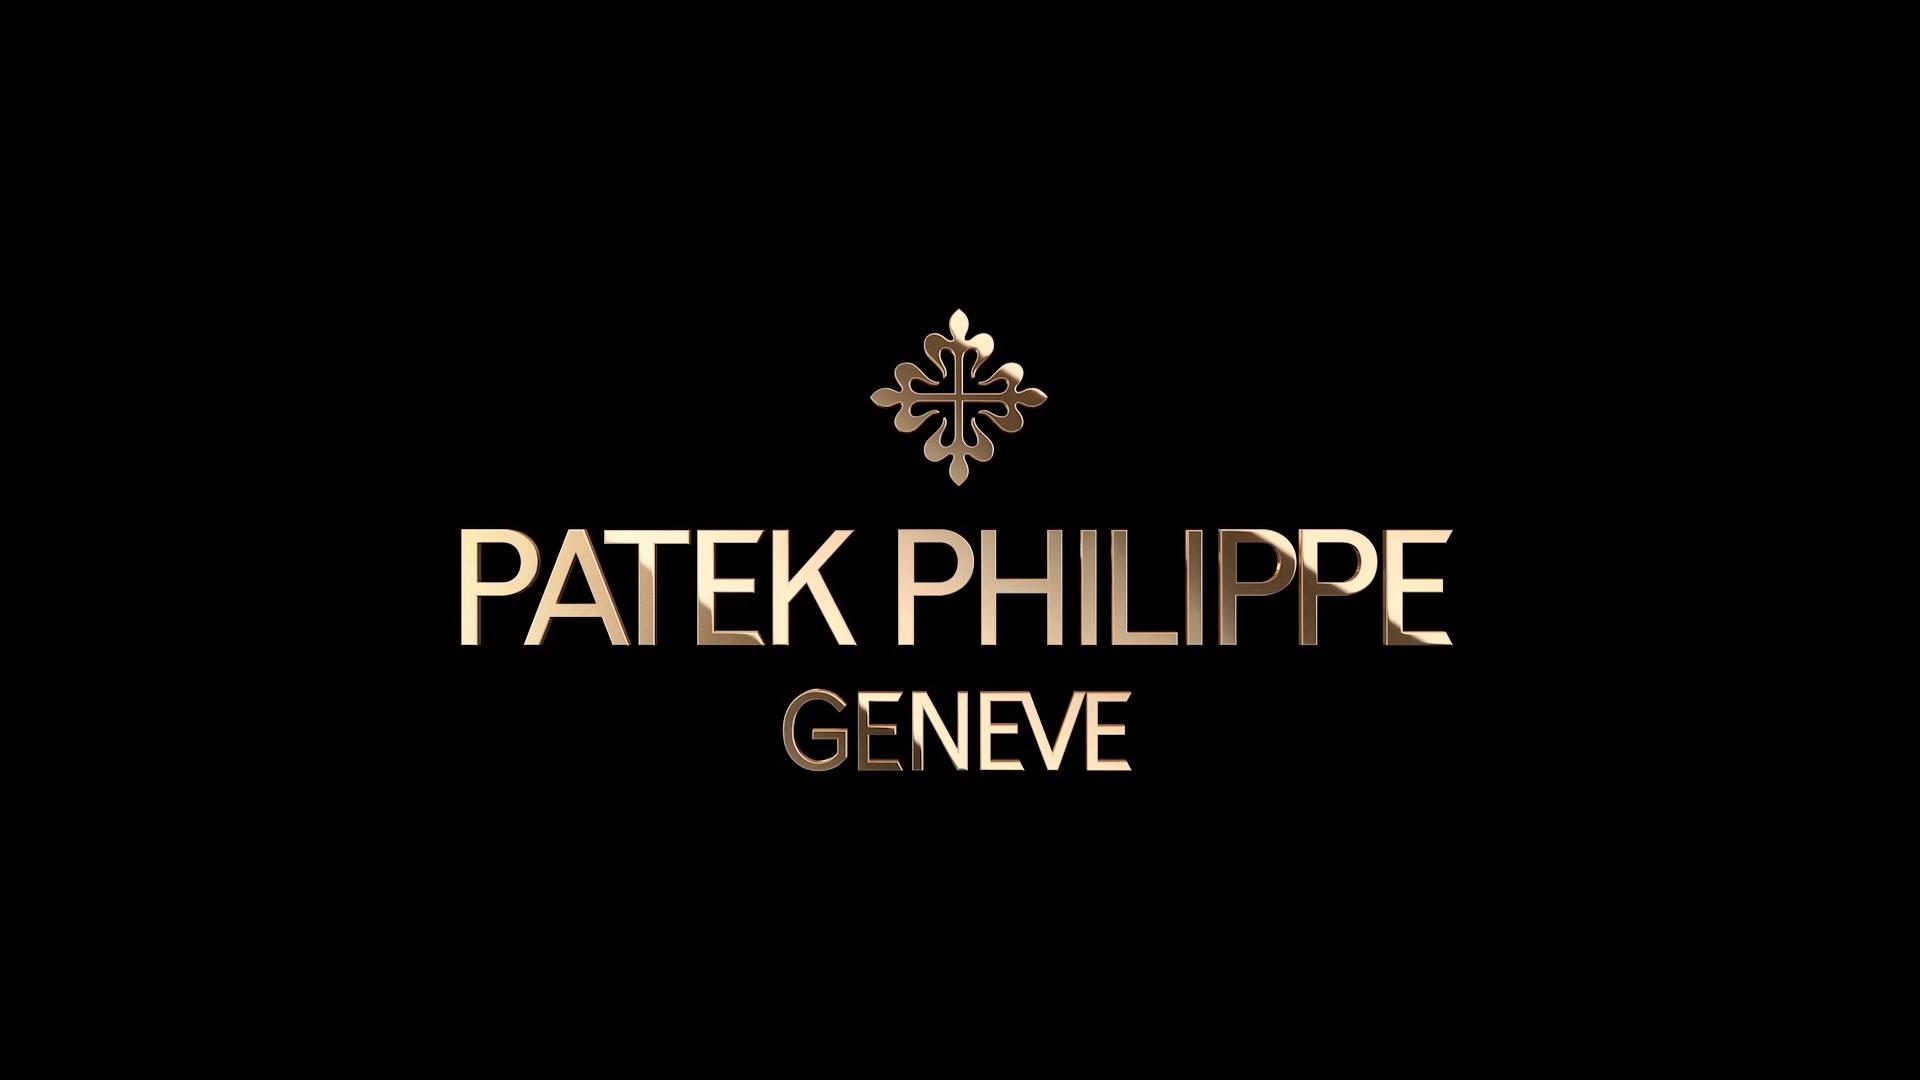 Patek Philippe Grand Complications Ref. 5207G-001 White Gold